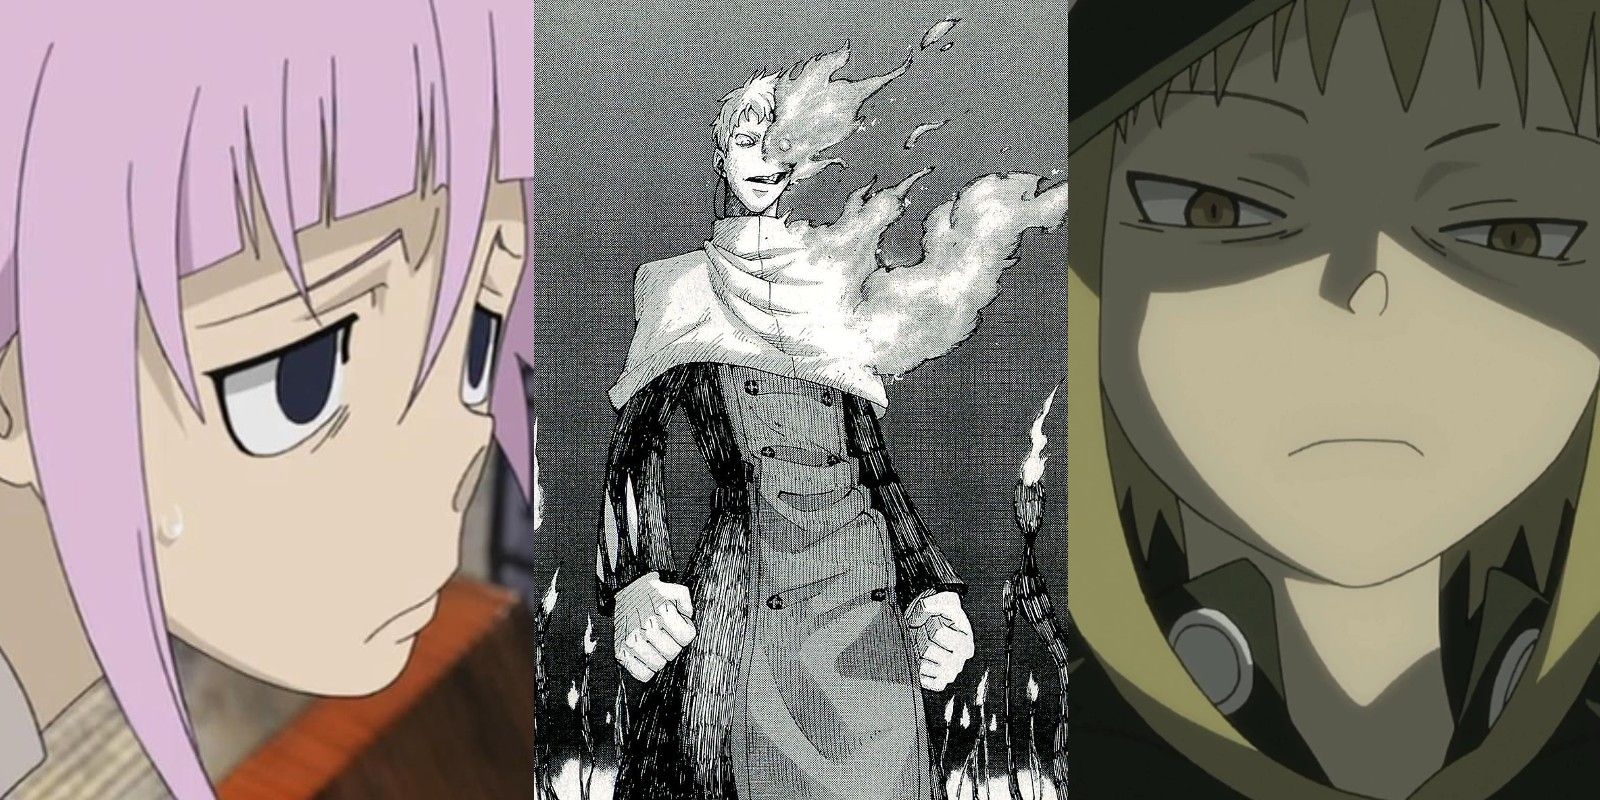 Soul Eater: 10 Best Fights in the Anime, Ranked